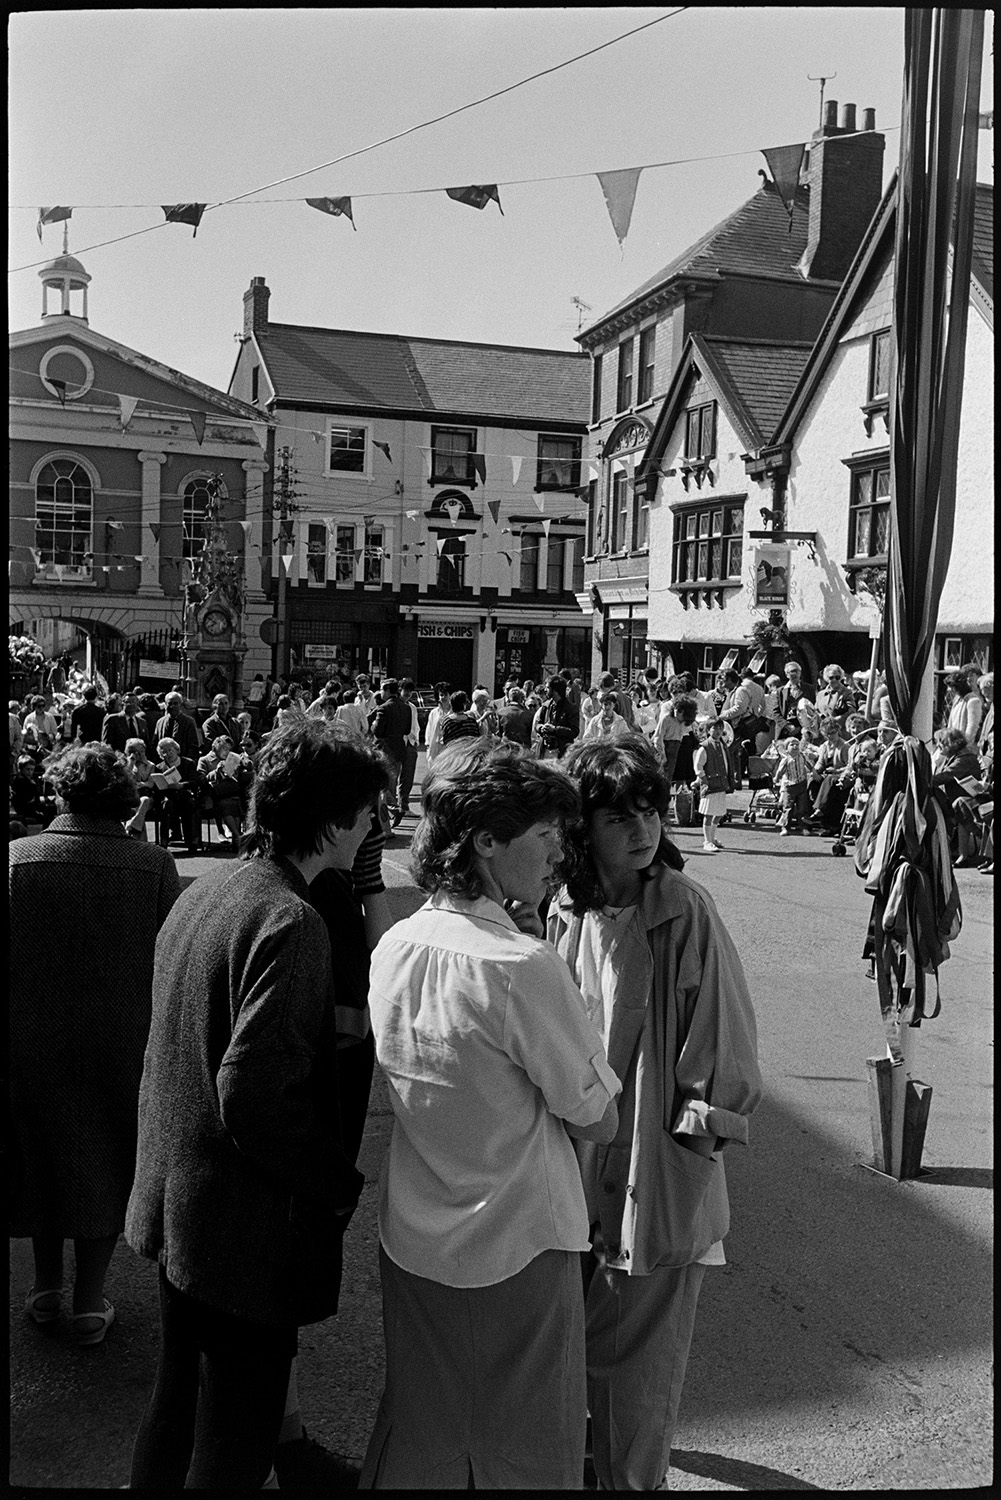 May Fair celebrations, people waiting for start of fair, preparing float. 
[Men and women gathered in Torrington Square waiting for the start of the May Fair. The square is decorated with bunting and a maypole is visible in the foreground.]